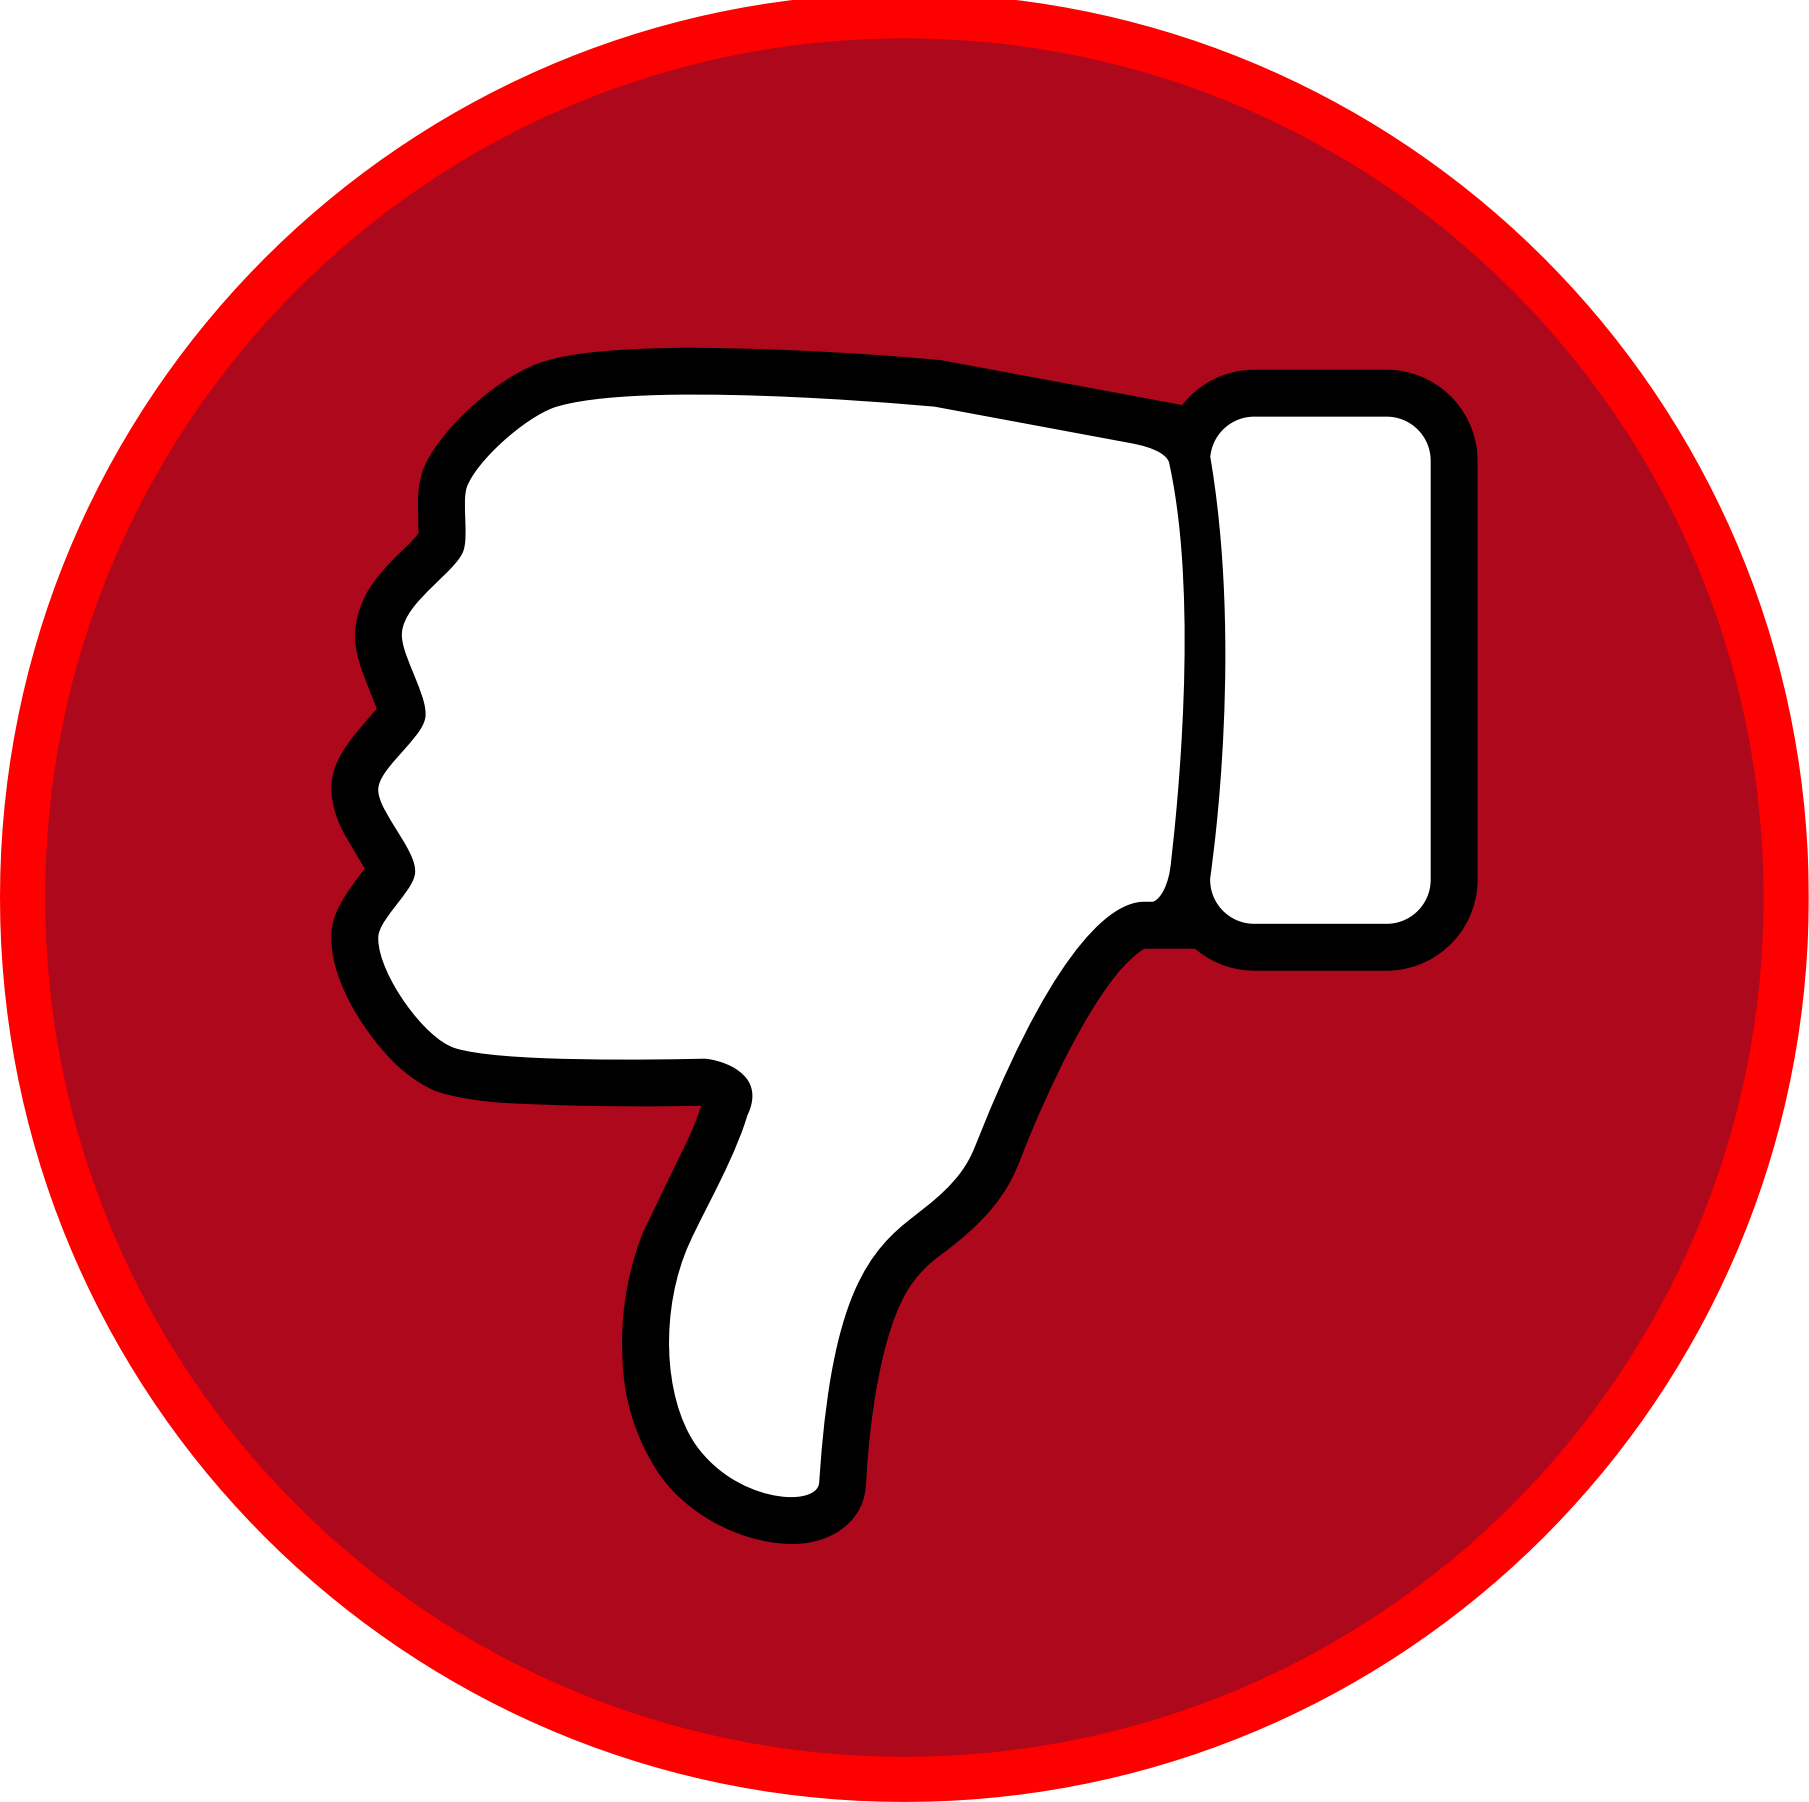 Big Image (Png) - Thumbs Down, Transparent background PNG HD thumbnail